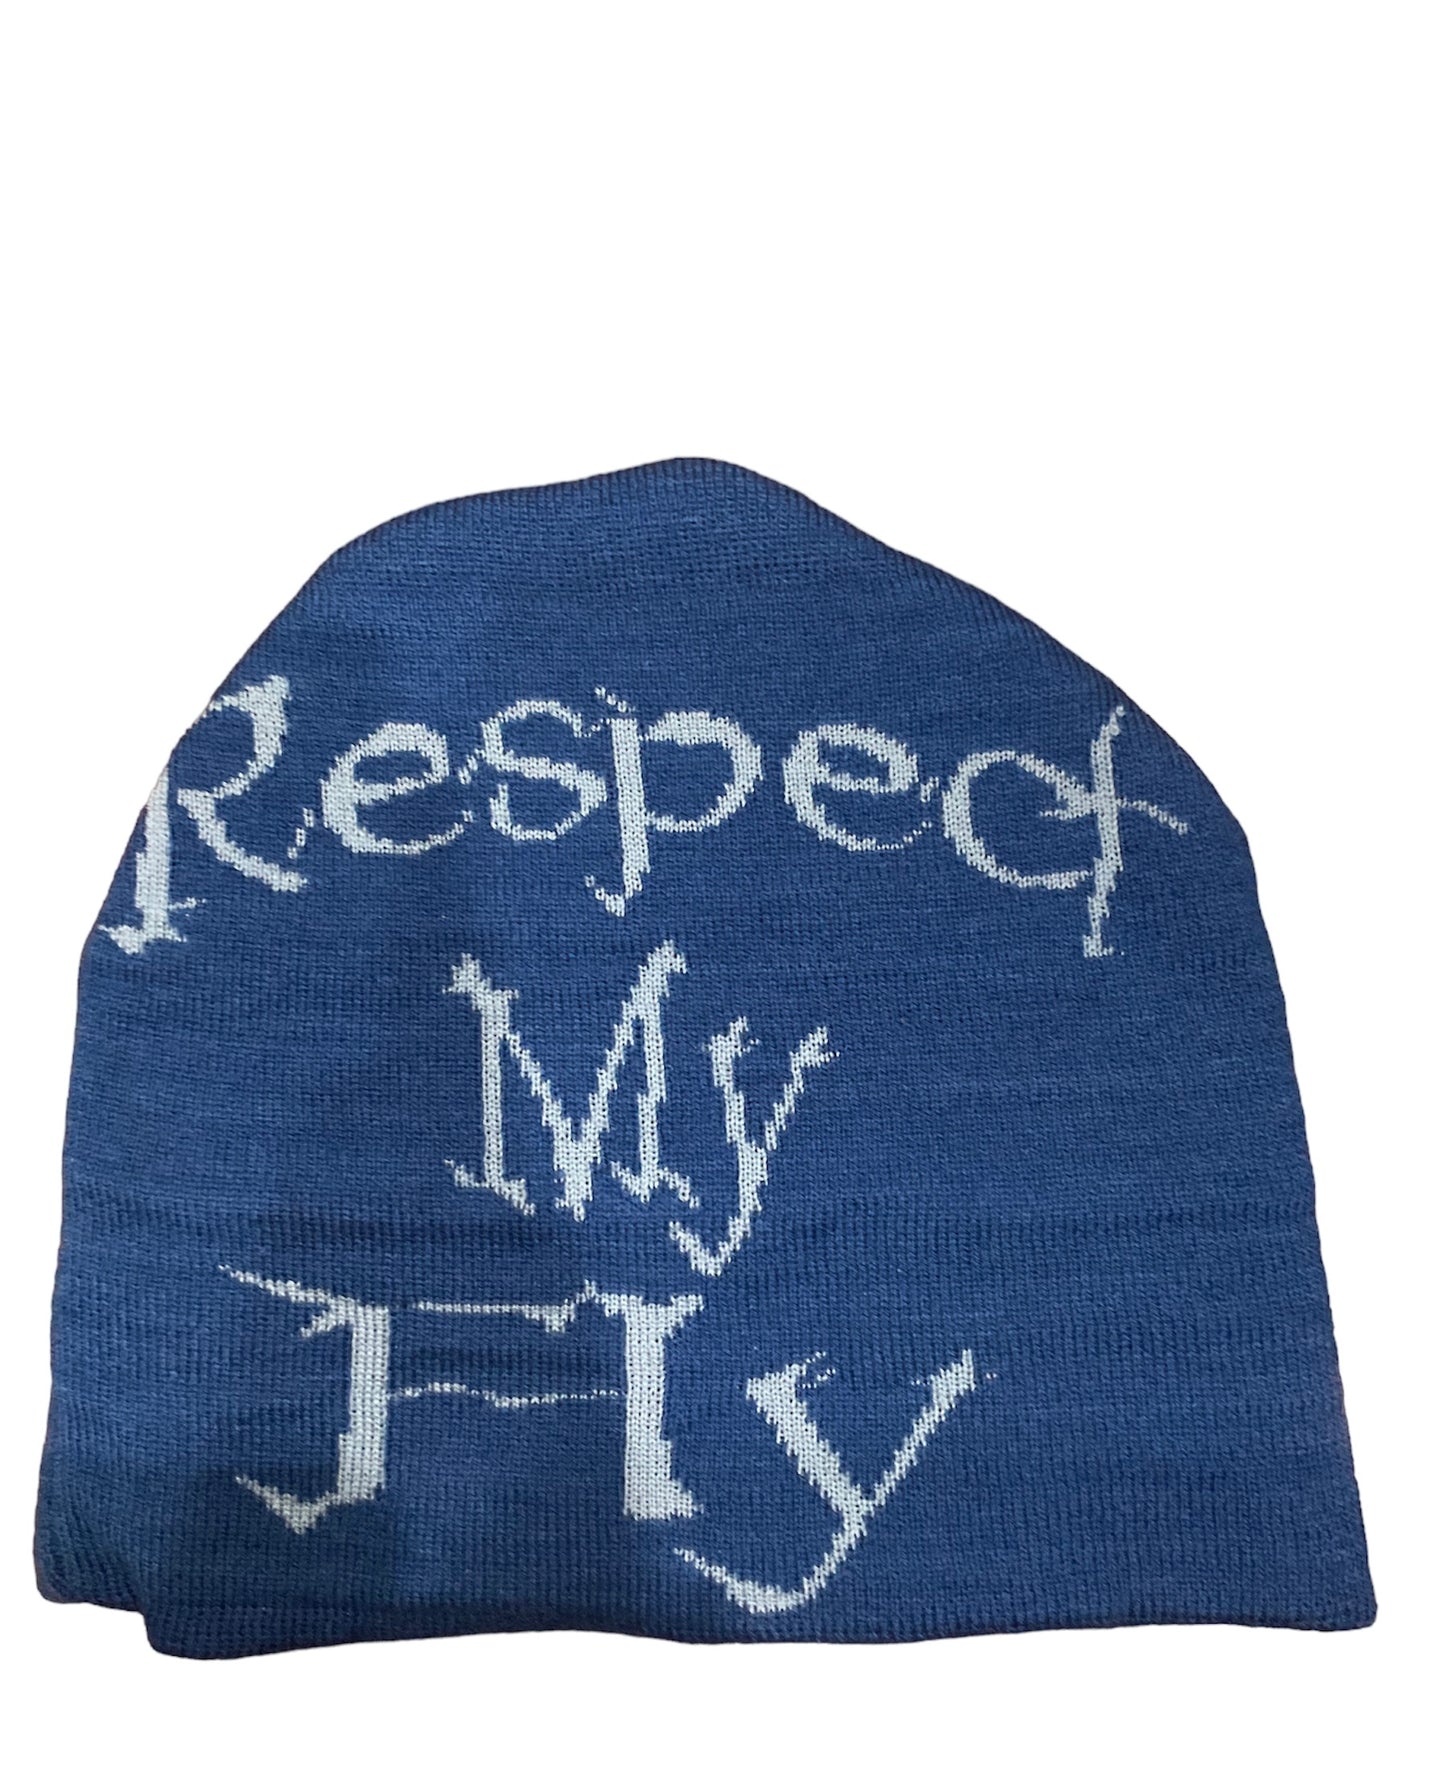 Respect My Fly beanies